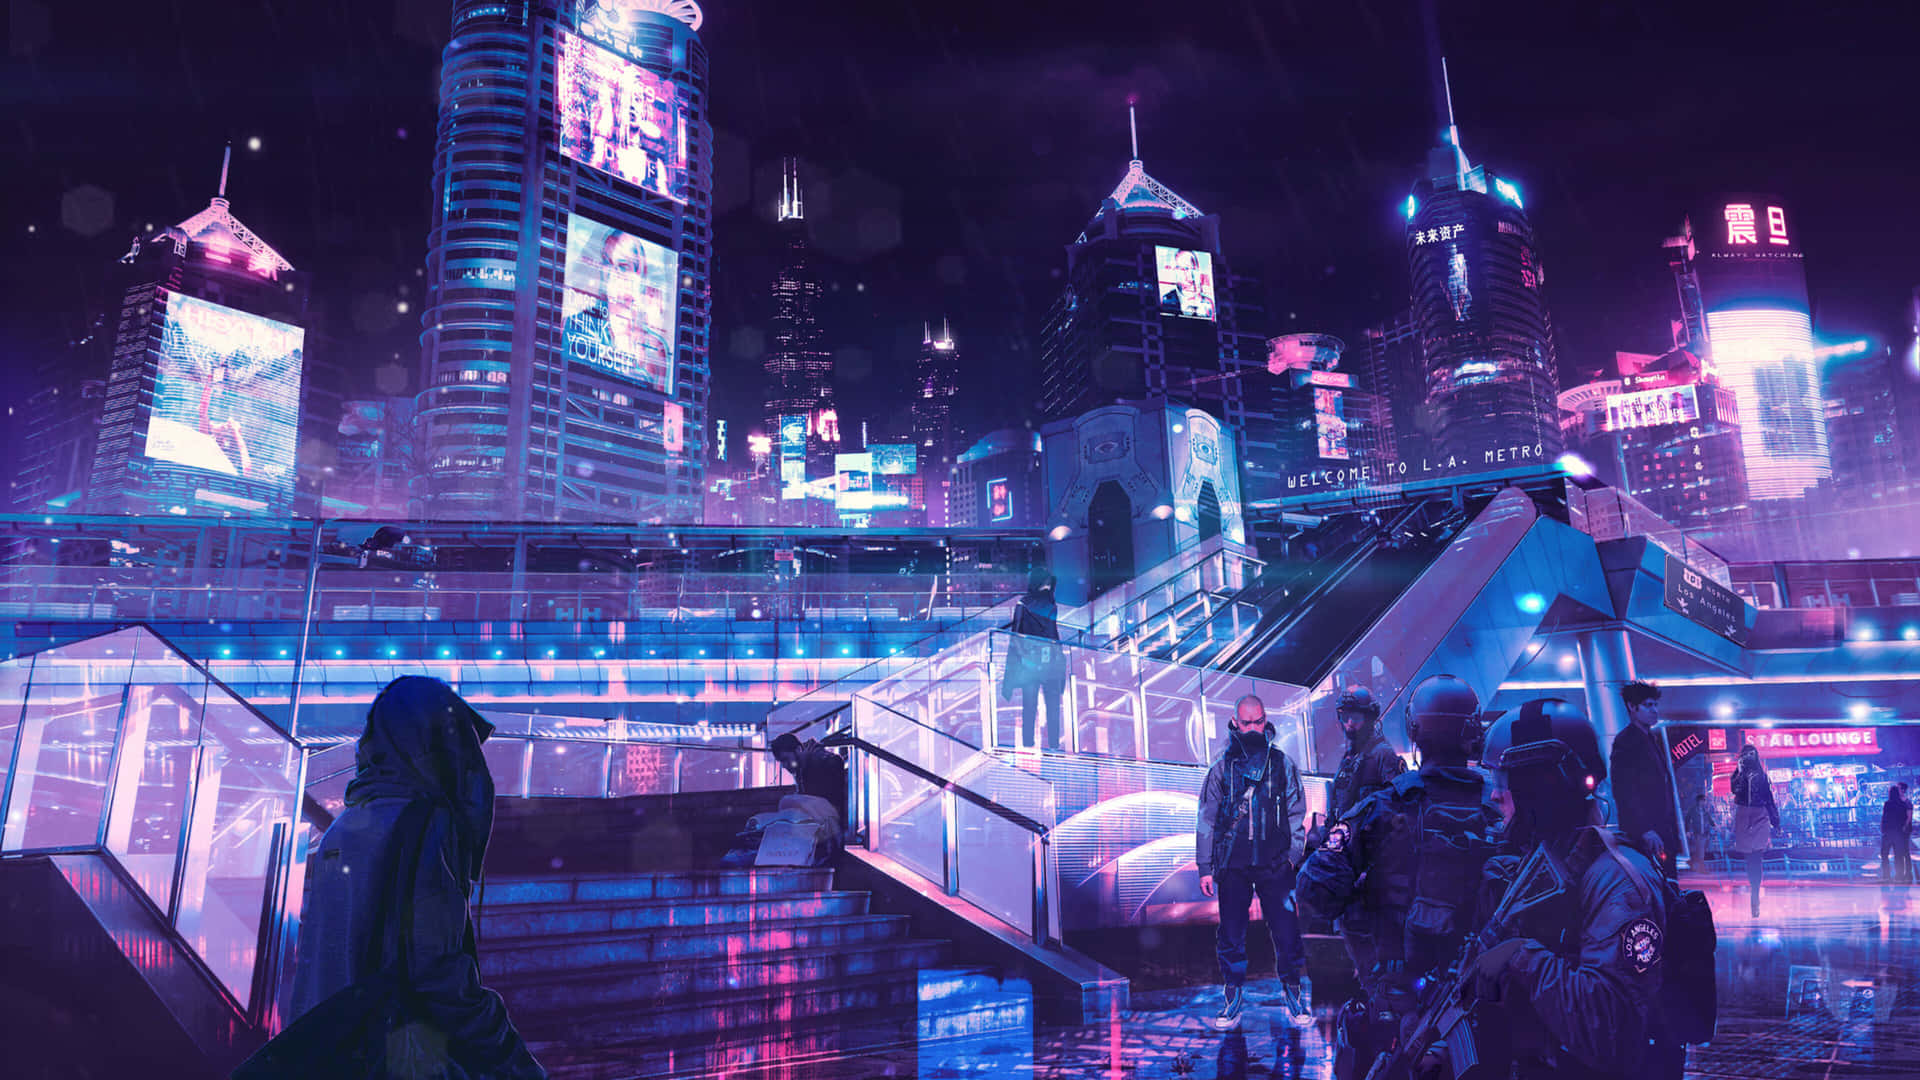 Make your mark in the neon dystopia of Cyberpunk City